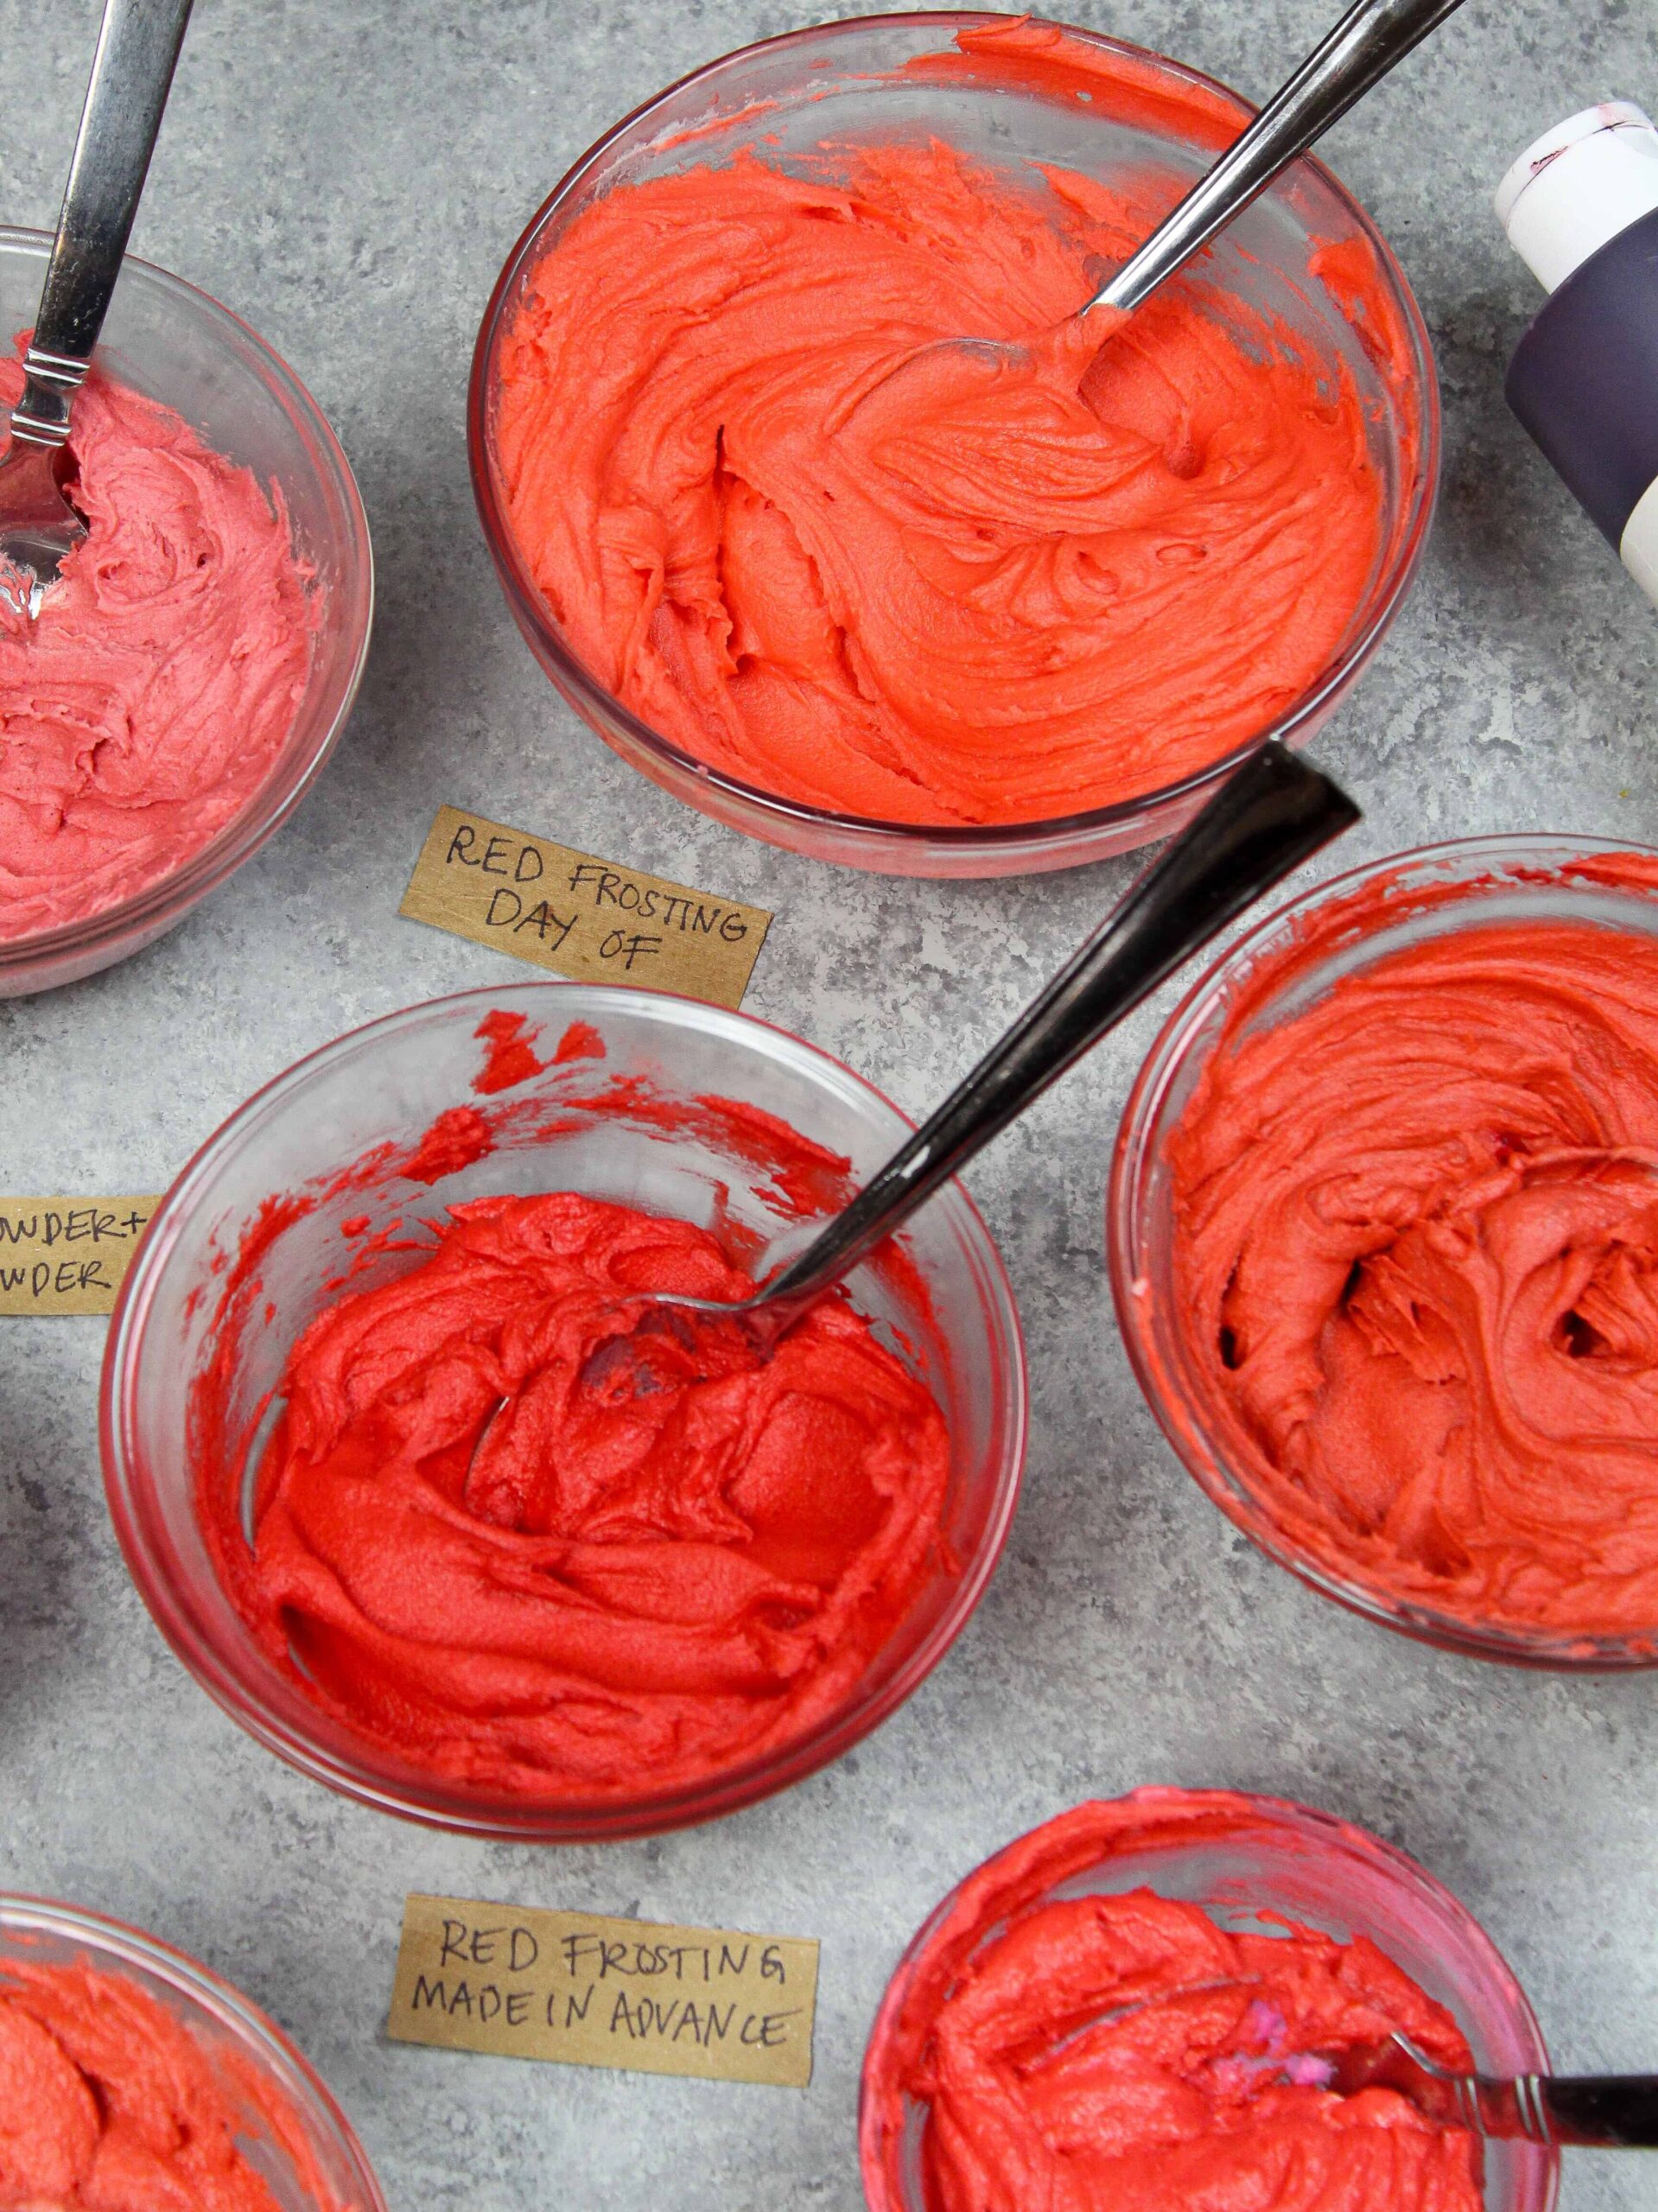 photo comparing red frosting made ahead of time against frosting made the day of, showing that the frosting made in advance is a much deeper and brighter shade of red